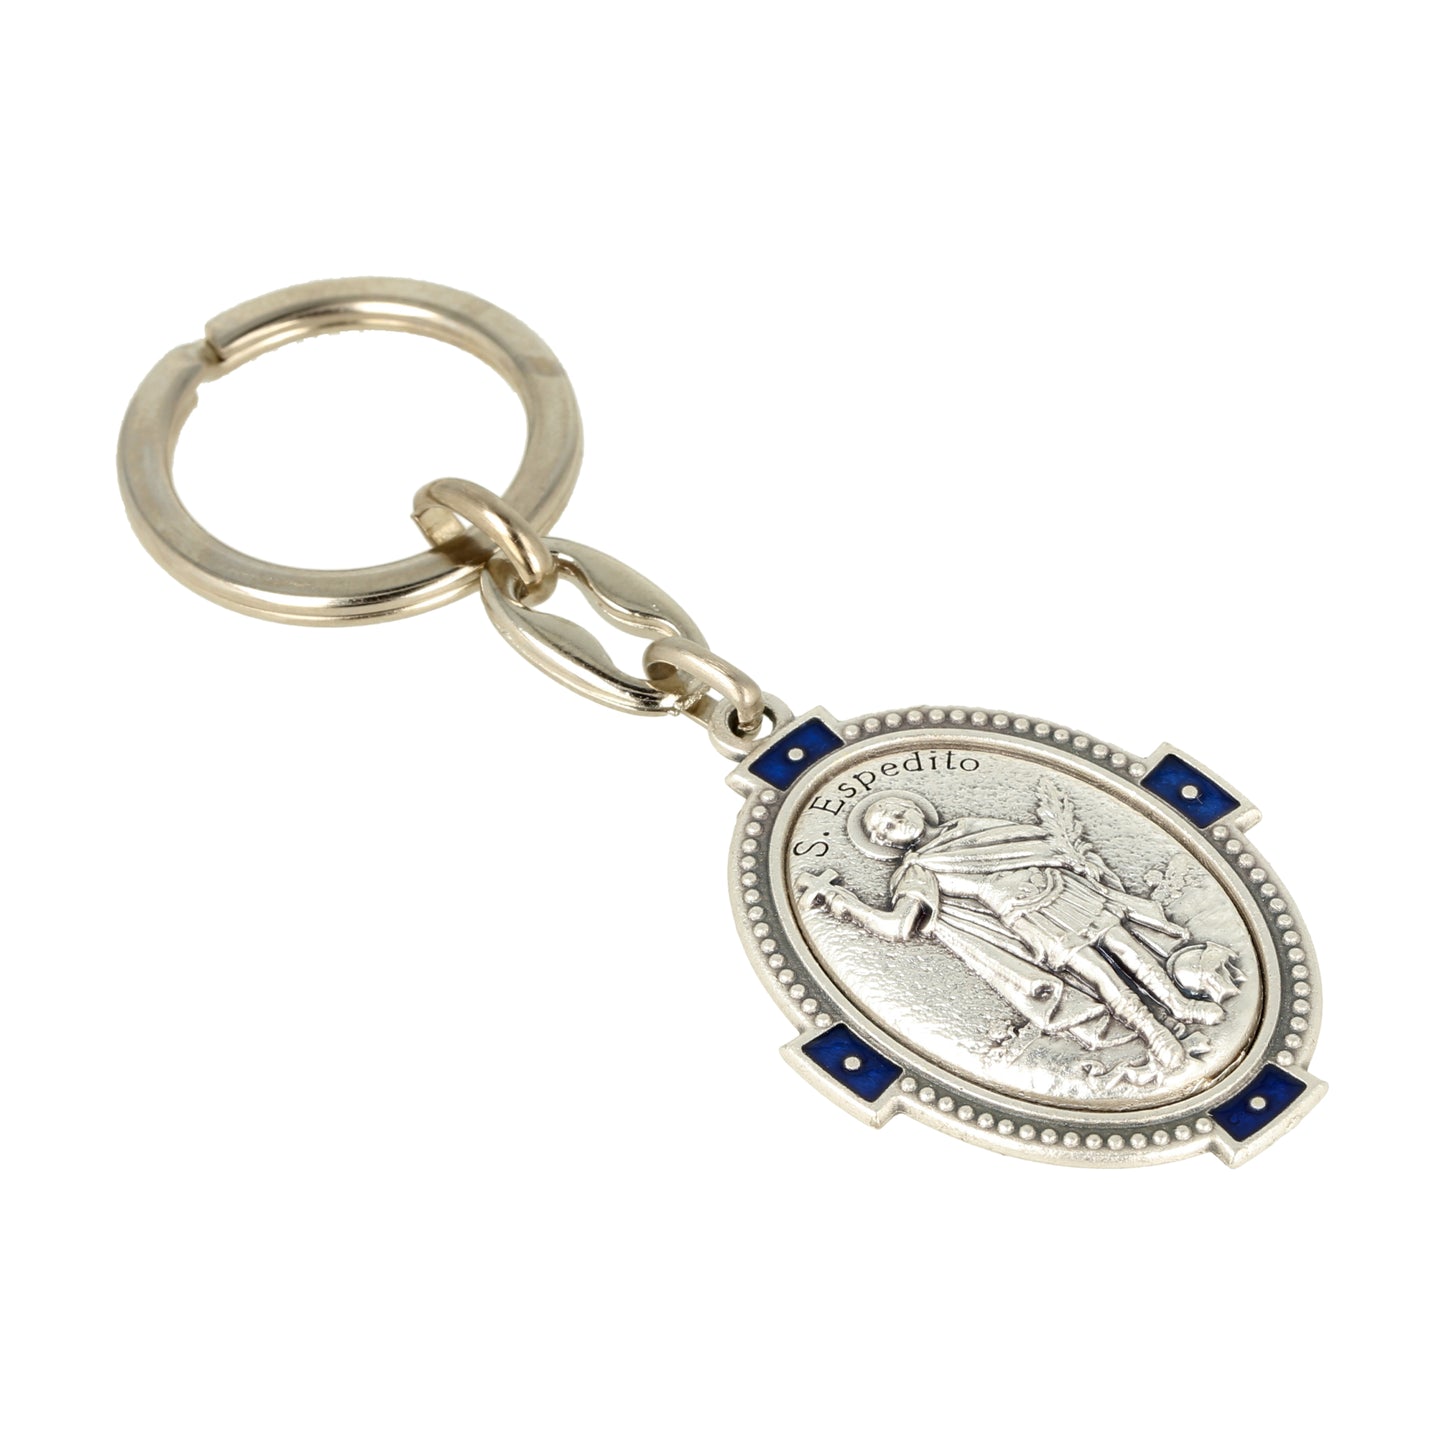 Keychain Saint Expedite Oval Deco Blue. Souvenirs from Italy